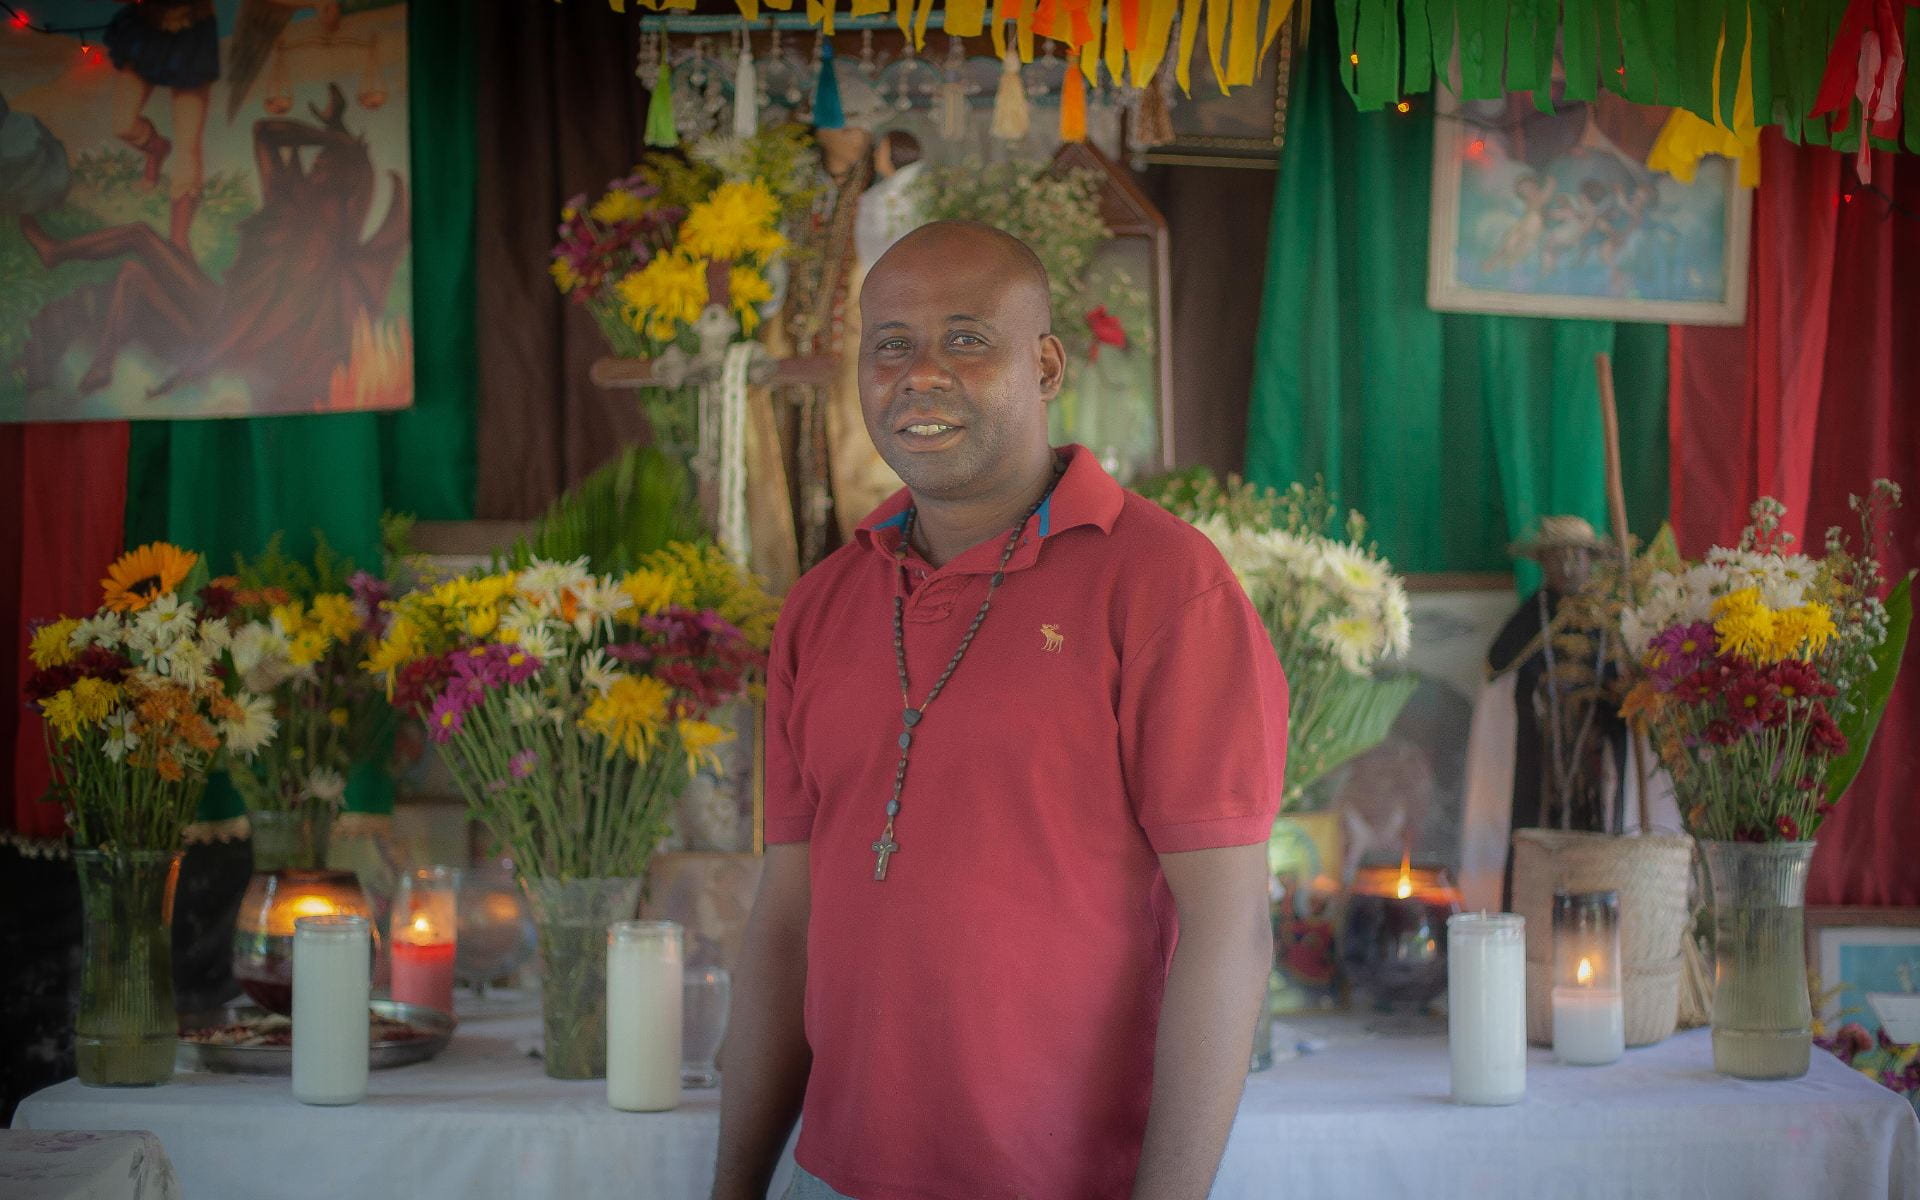 Ramoncito stands and looks into the camera in front of his altar laden with flowers and candles, wearing a red polo and rosary necklace.